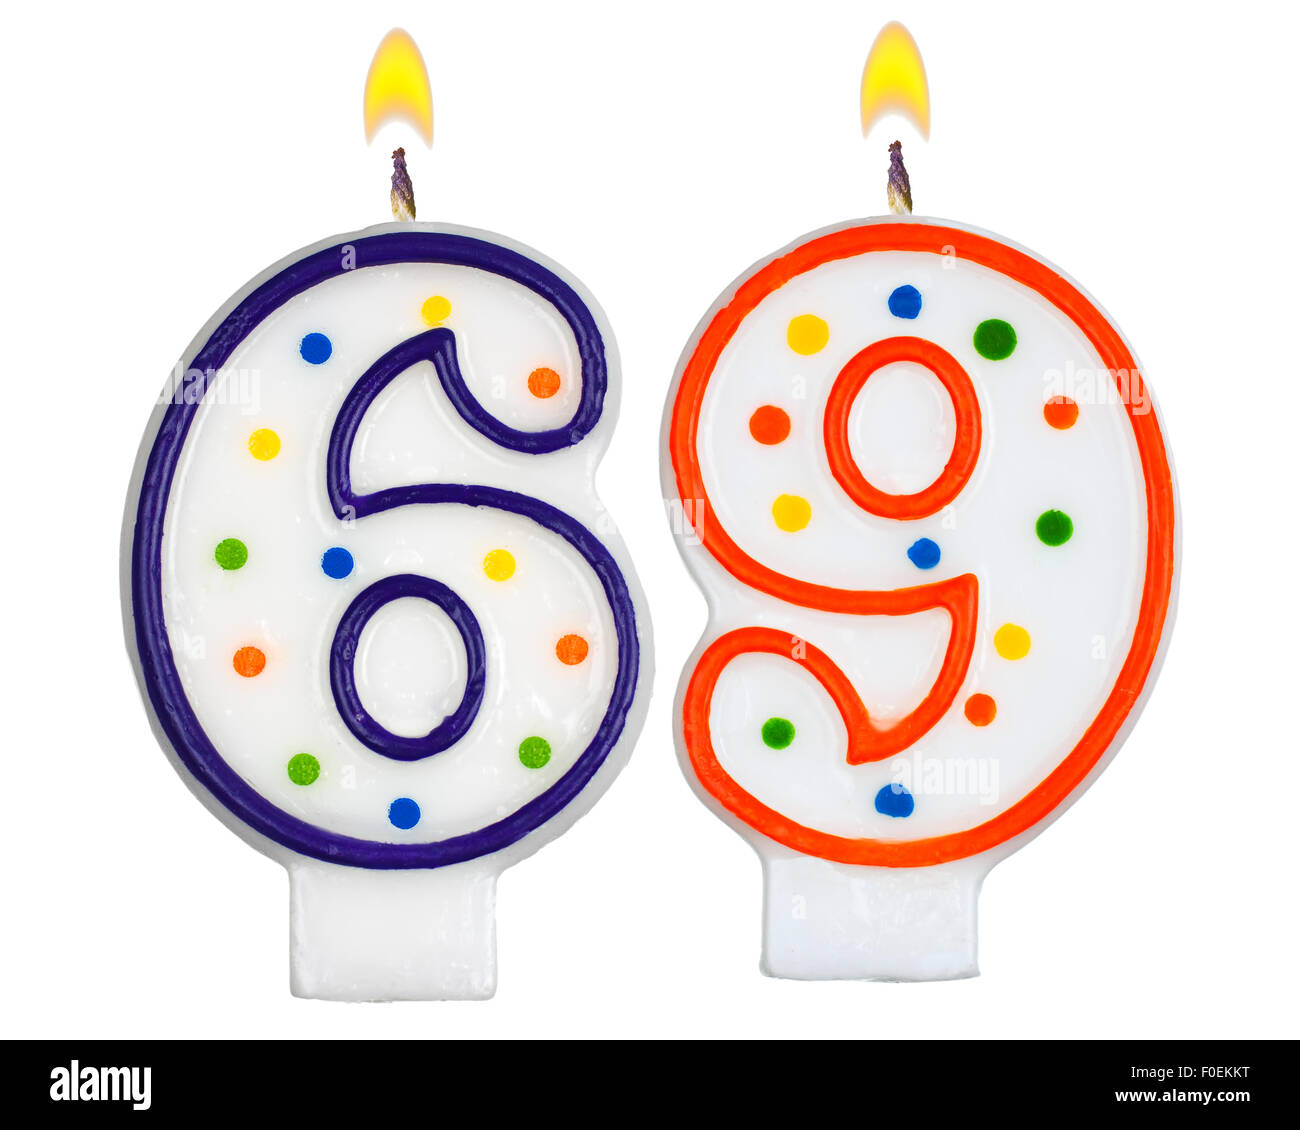 69th birthday Cut Out Stock Images & Pictures - Alamy